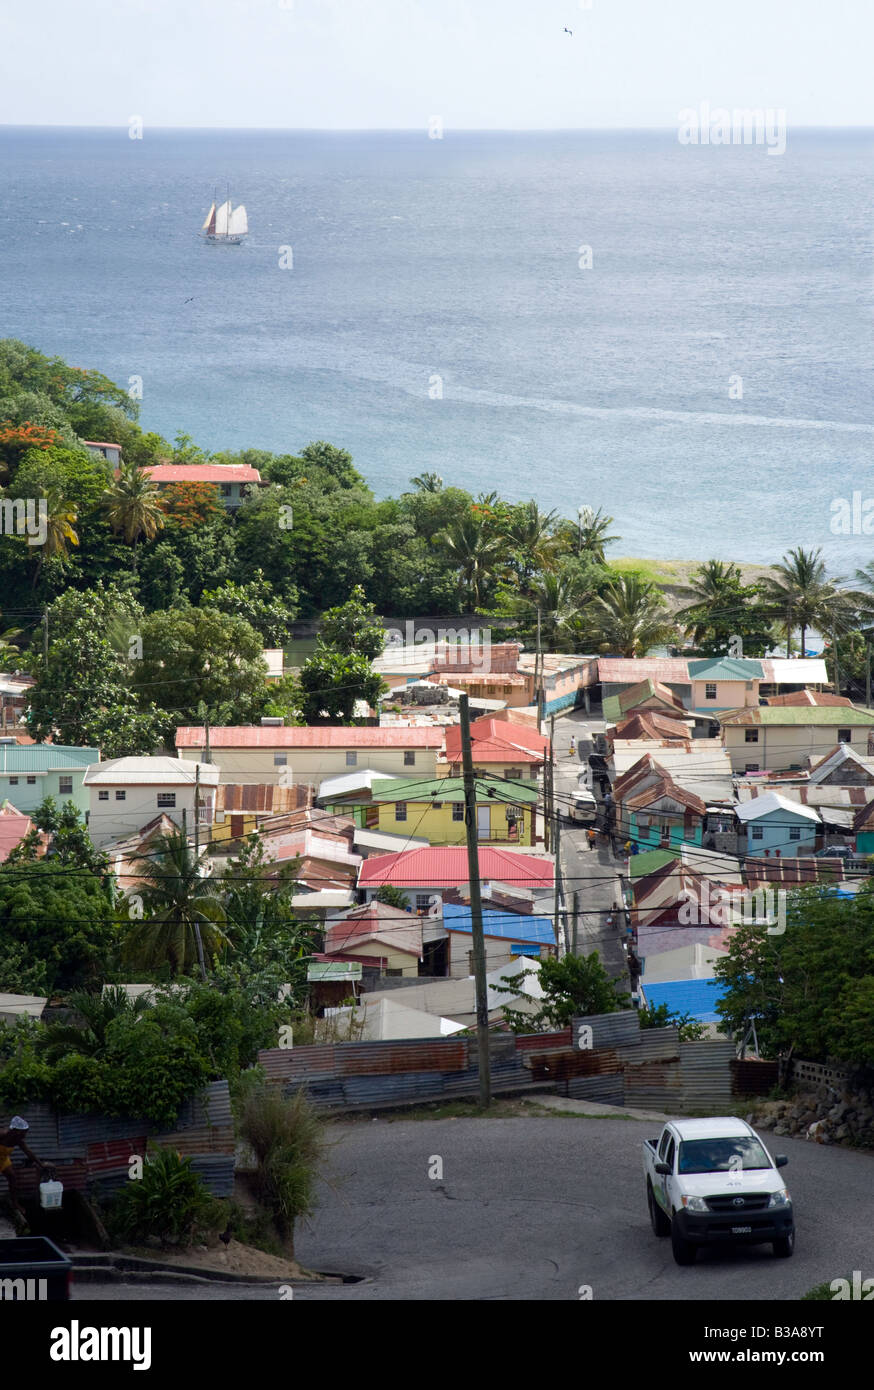 A view of the fishing village of Canaries looking down to the caribbean sea, St Lucia, 'West Indies' Stock Photo